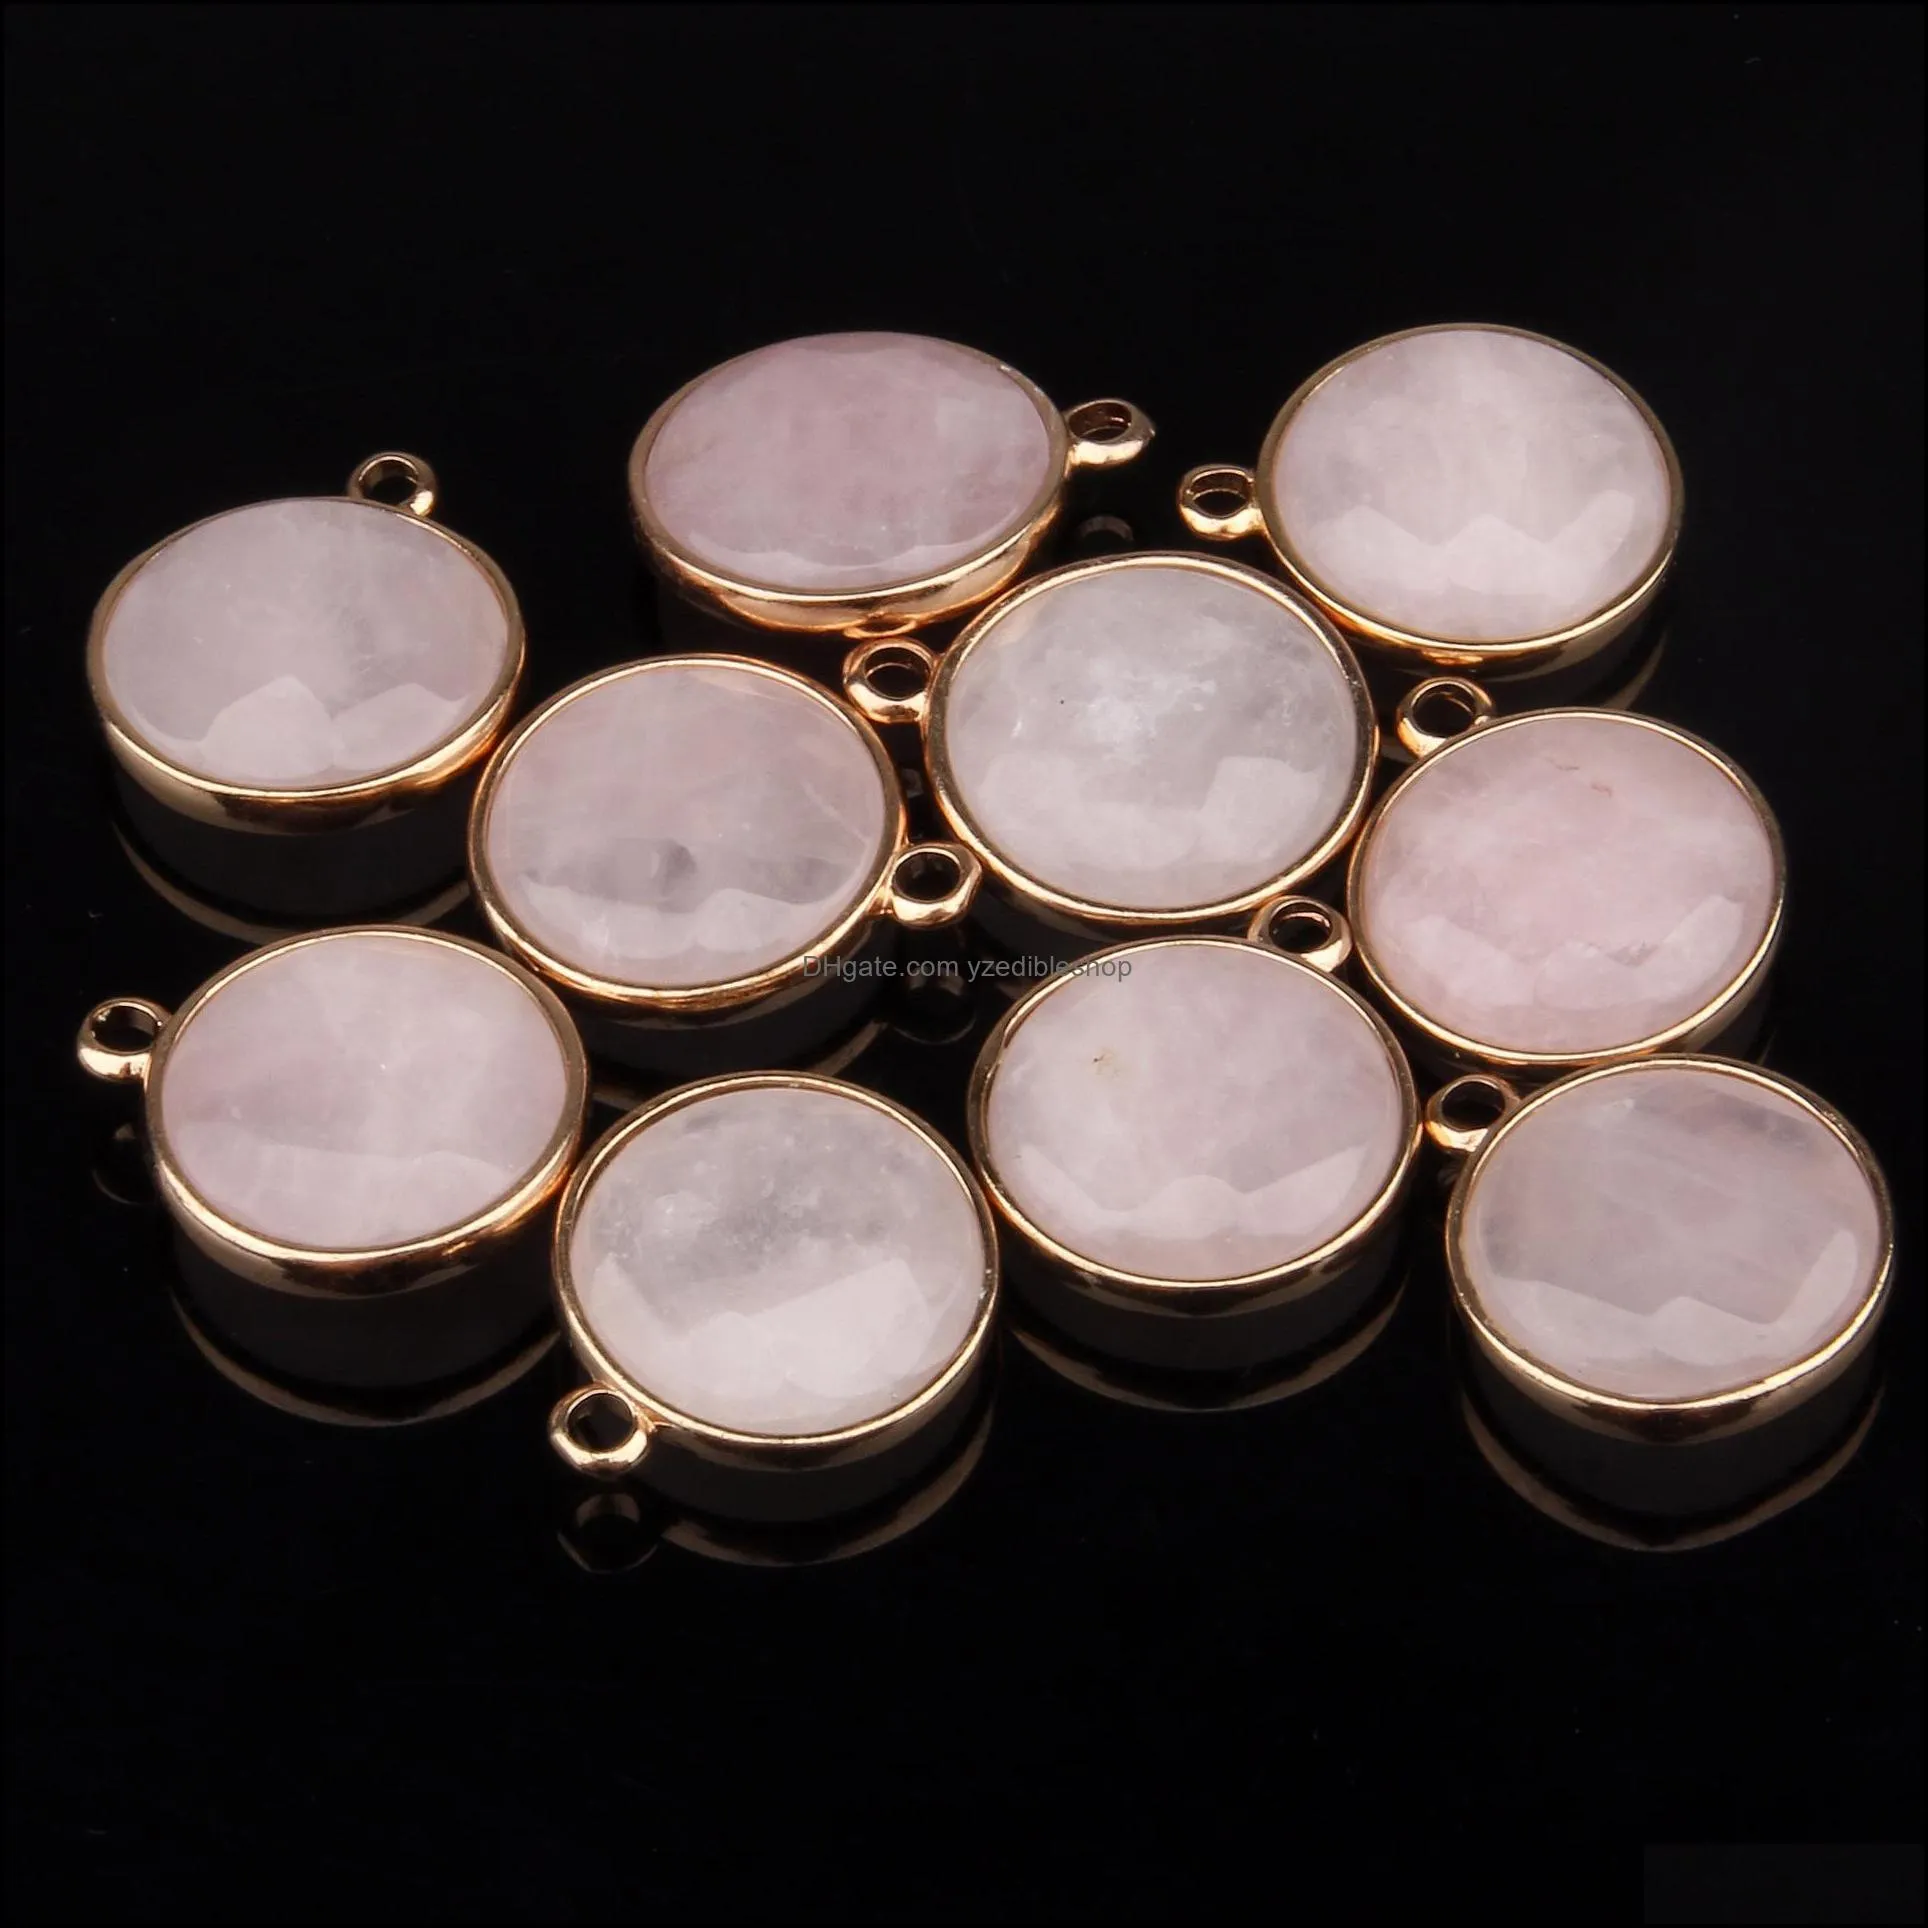 wholesale flat round charms natural stone rose quartz tiger eyes pendant diy for druzy necklace earrings or jewelry making 18x21x7mm